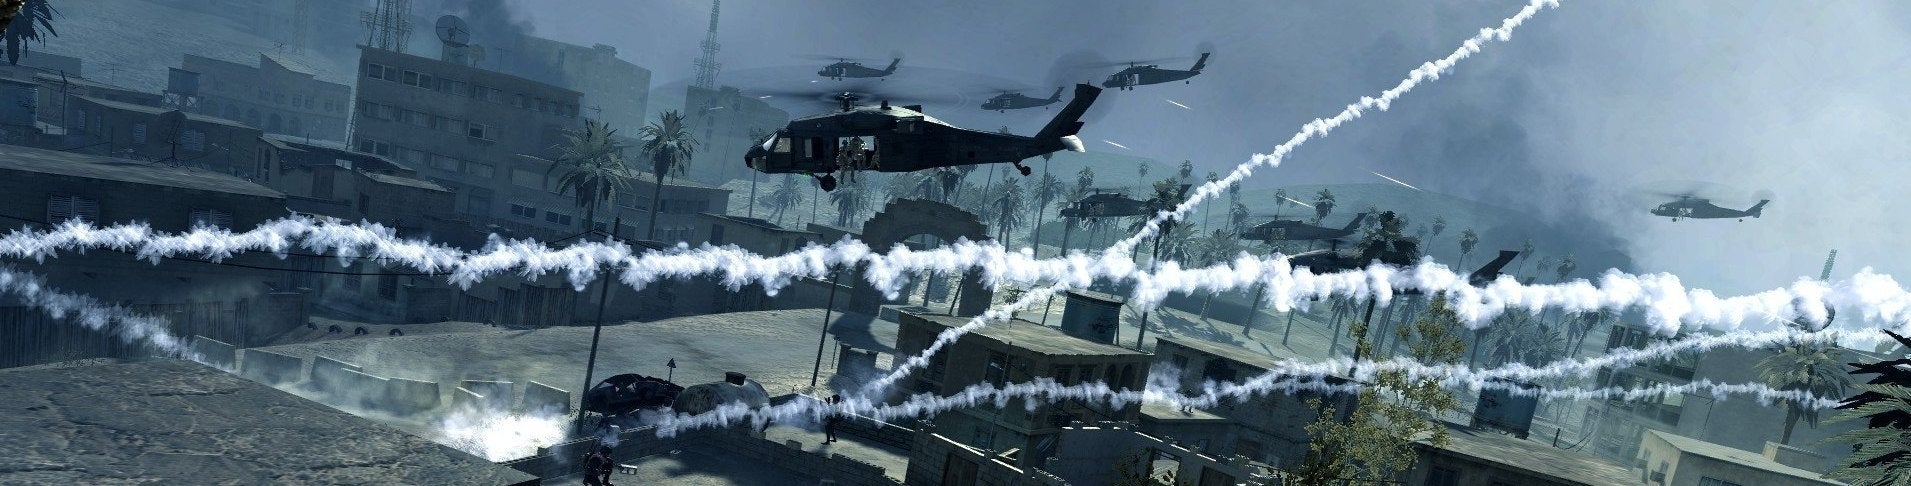 Image for The seven year shadow left by Modern Warfare